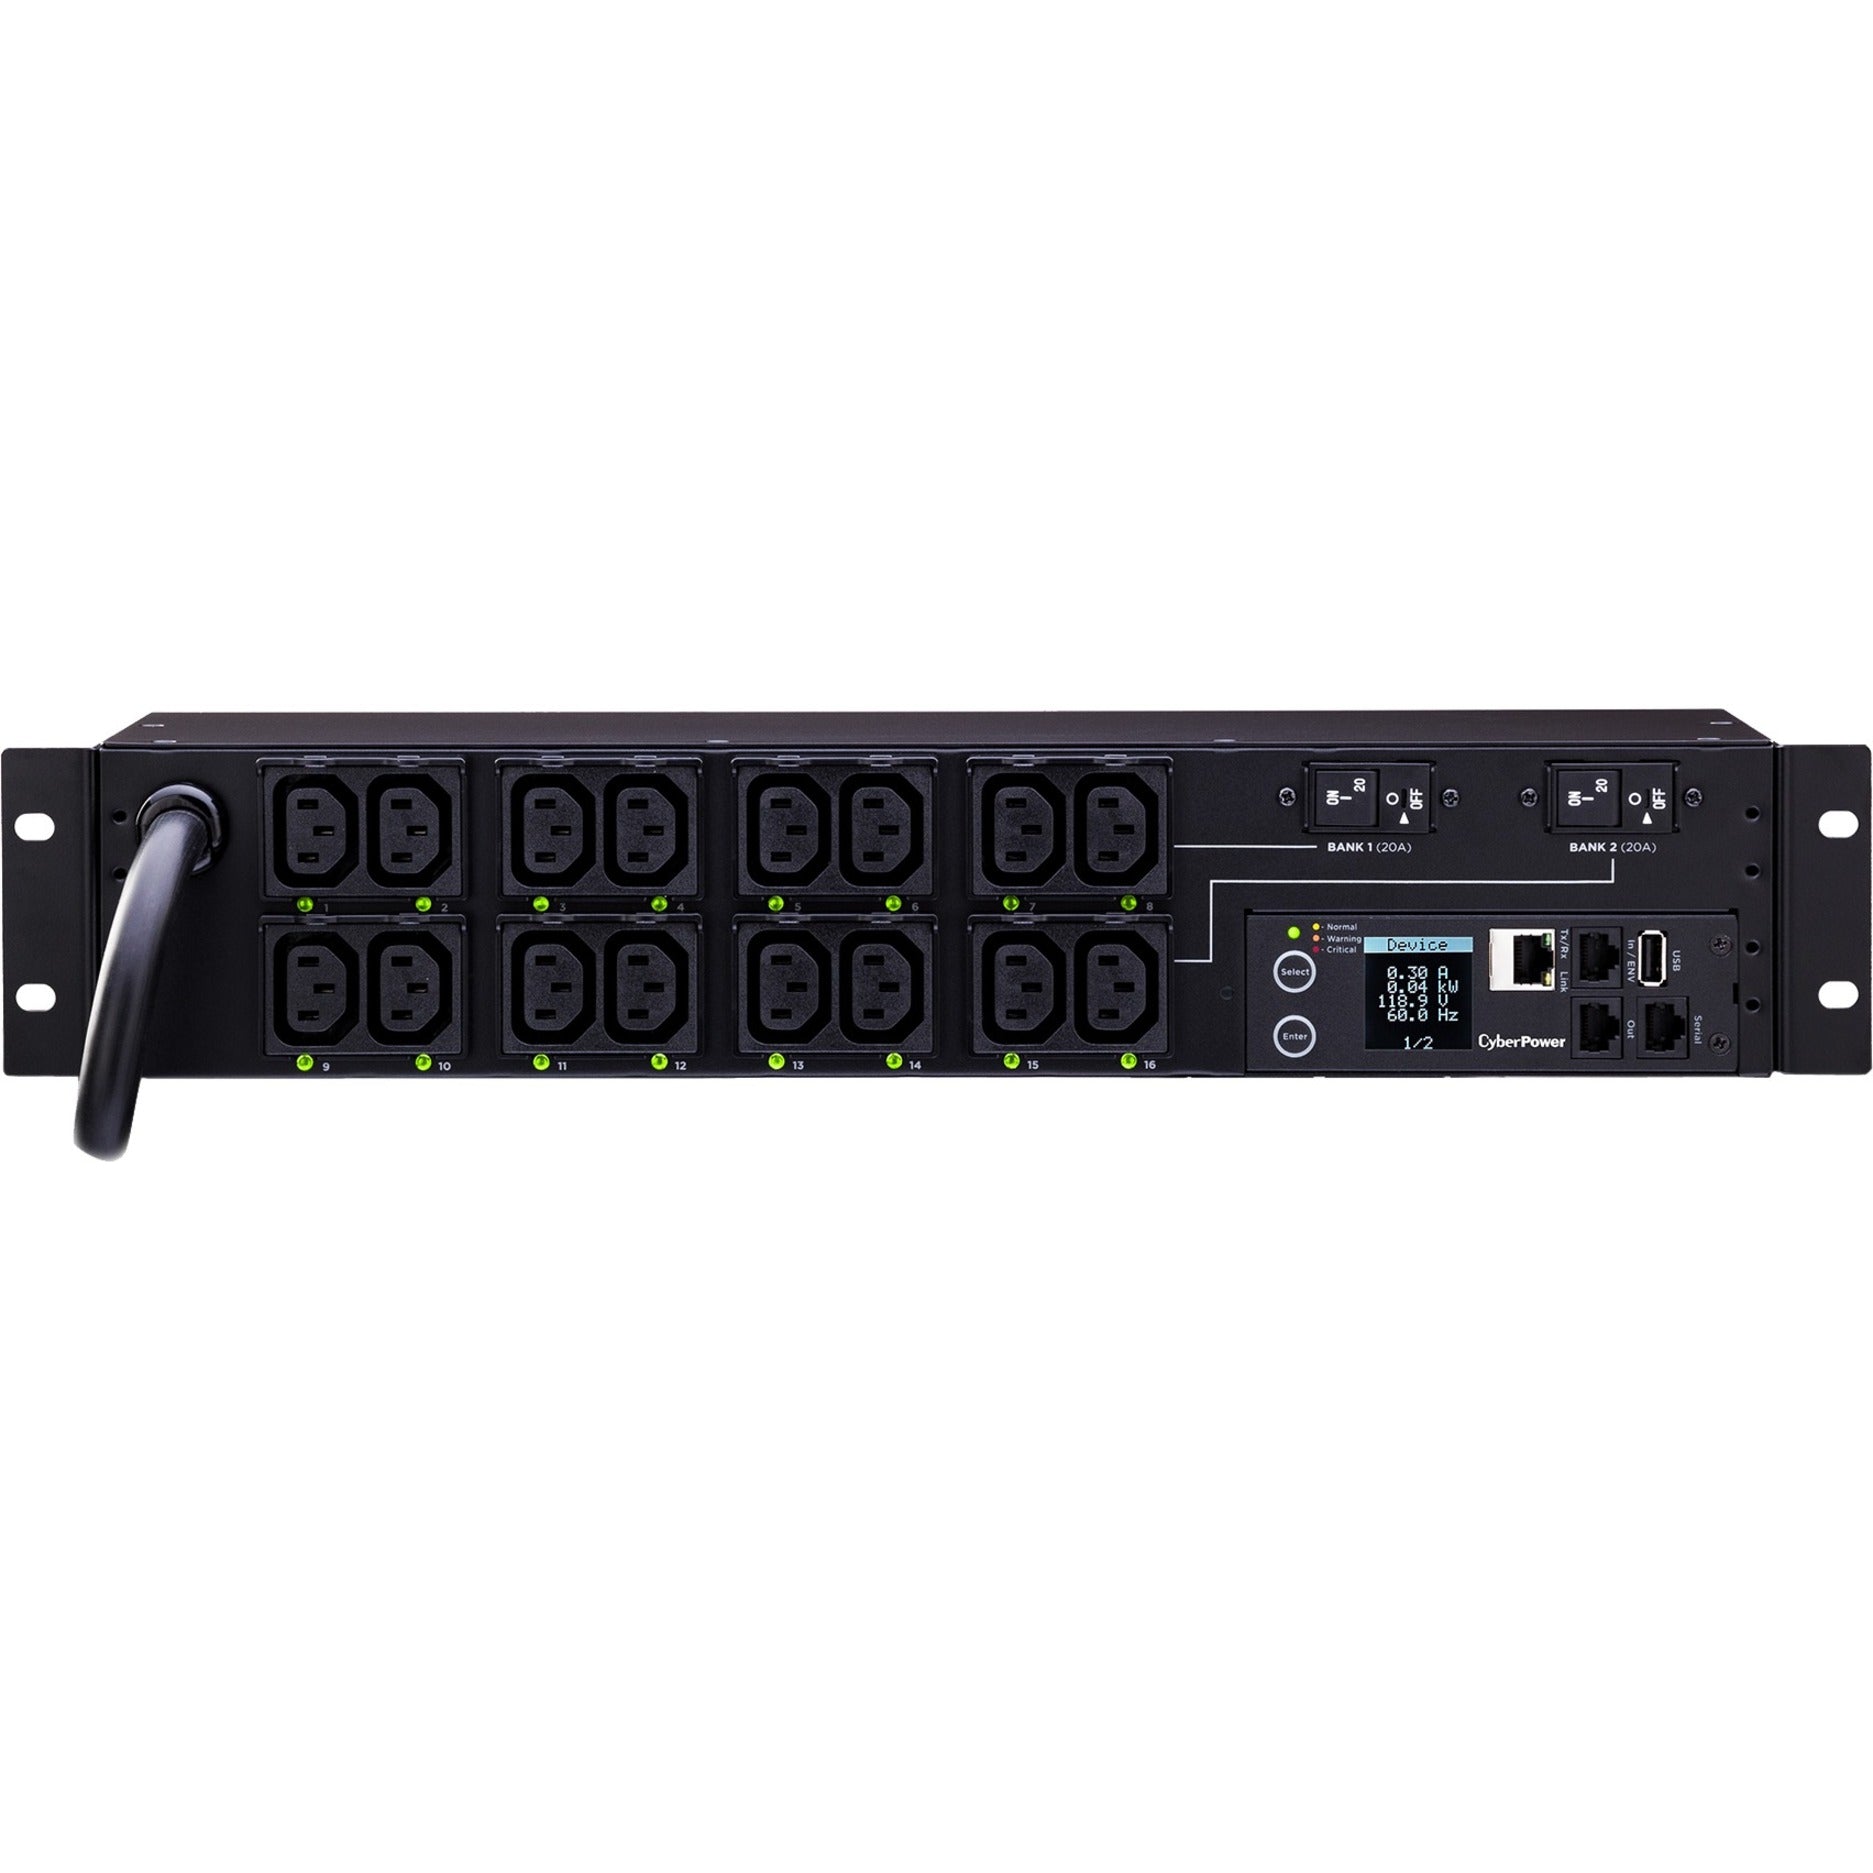 CyberPower PDU81007 16-Outlet PDU, Switched Metered-by-Outlet PDU, 30A, 230V AC